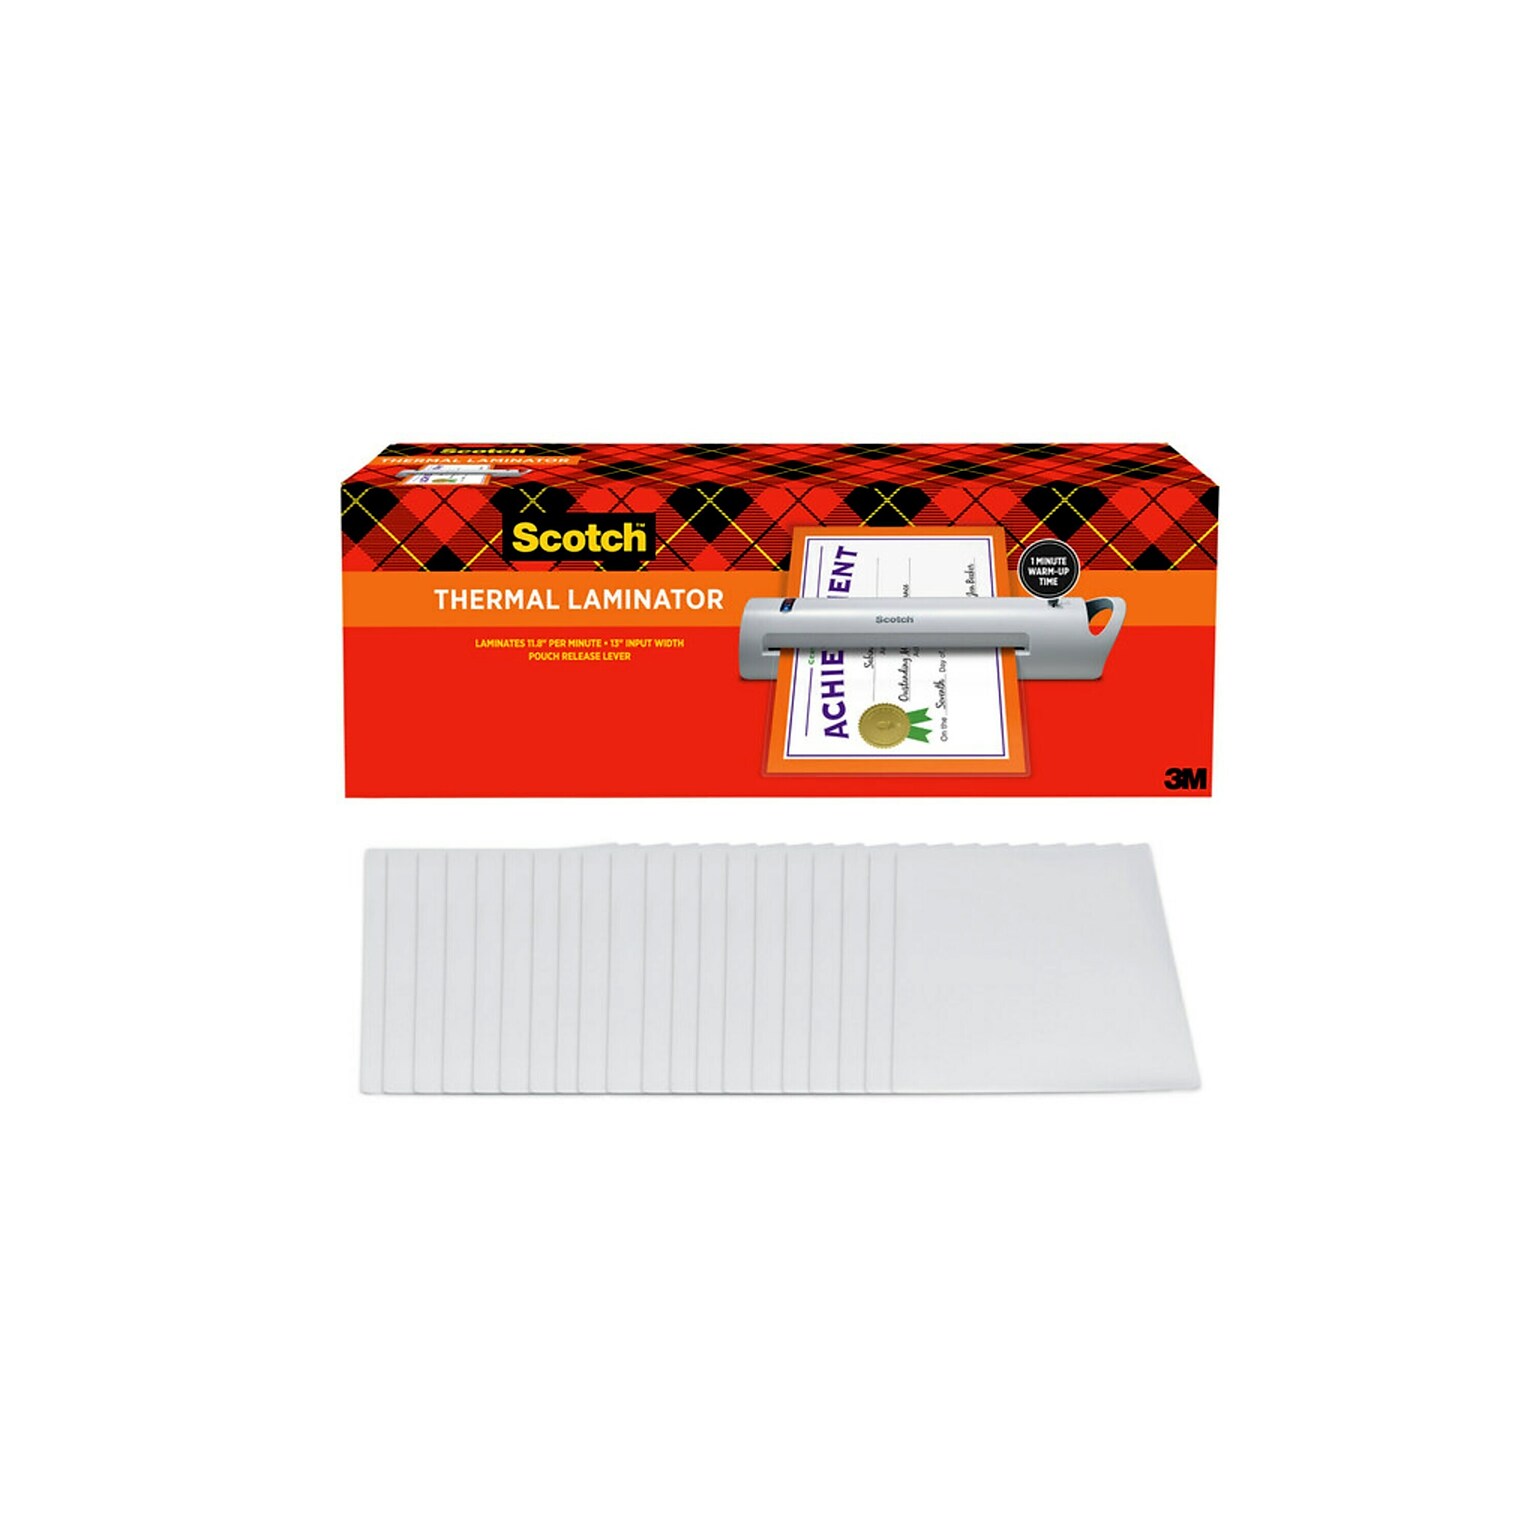 Scotch Thermal Laminator with 20 Letter Size Pouches, 13 Width (TL1302XVP)